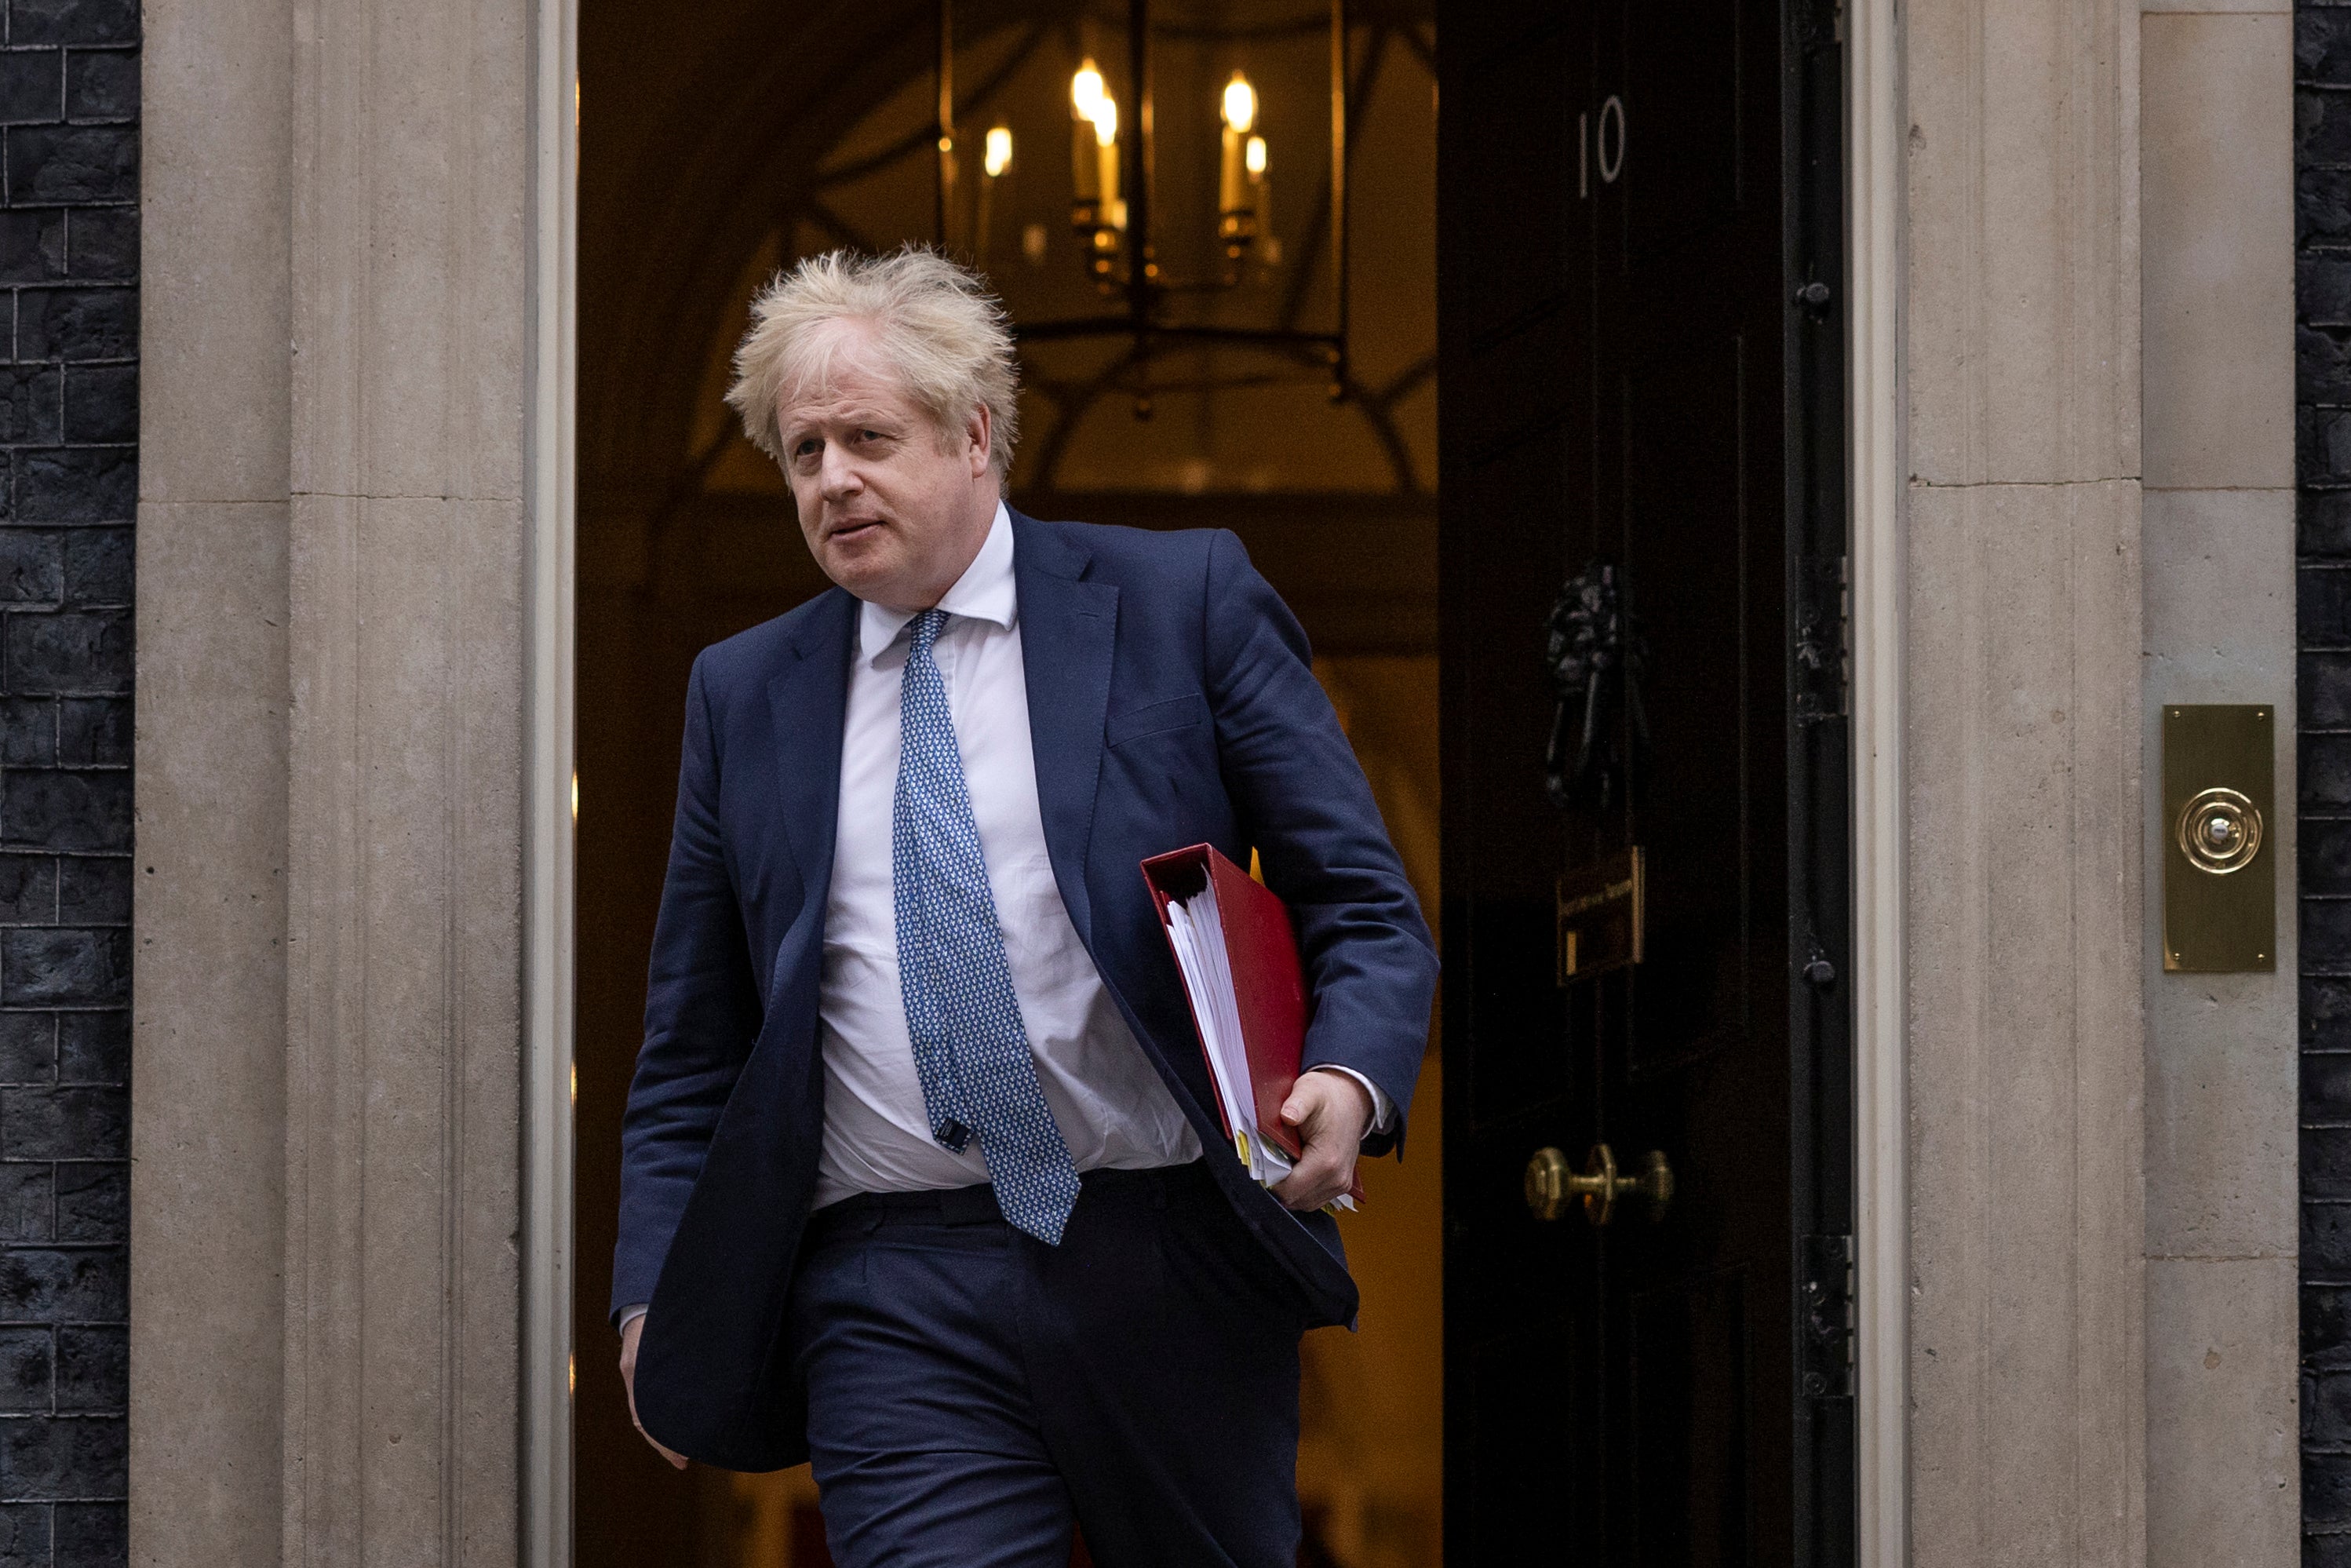 Police sent more than 100 legal questionnaires, including to Boris Johnson